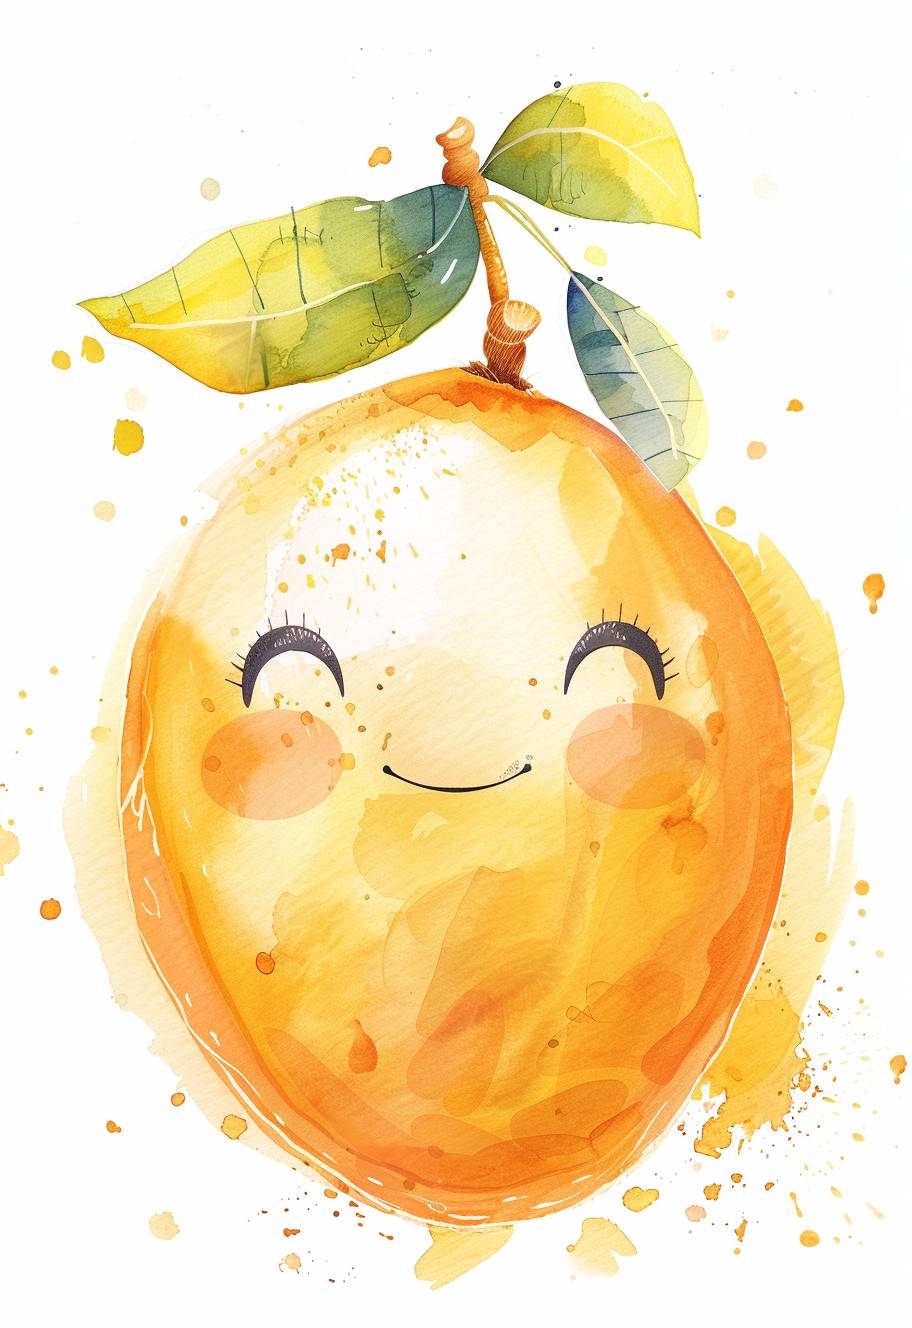 Create a beautiful mango core Pixar watercolor core clipart of a mango girl, texture background, use light colors, show full picture, no cut offs.